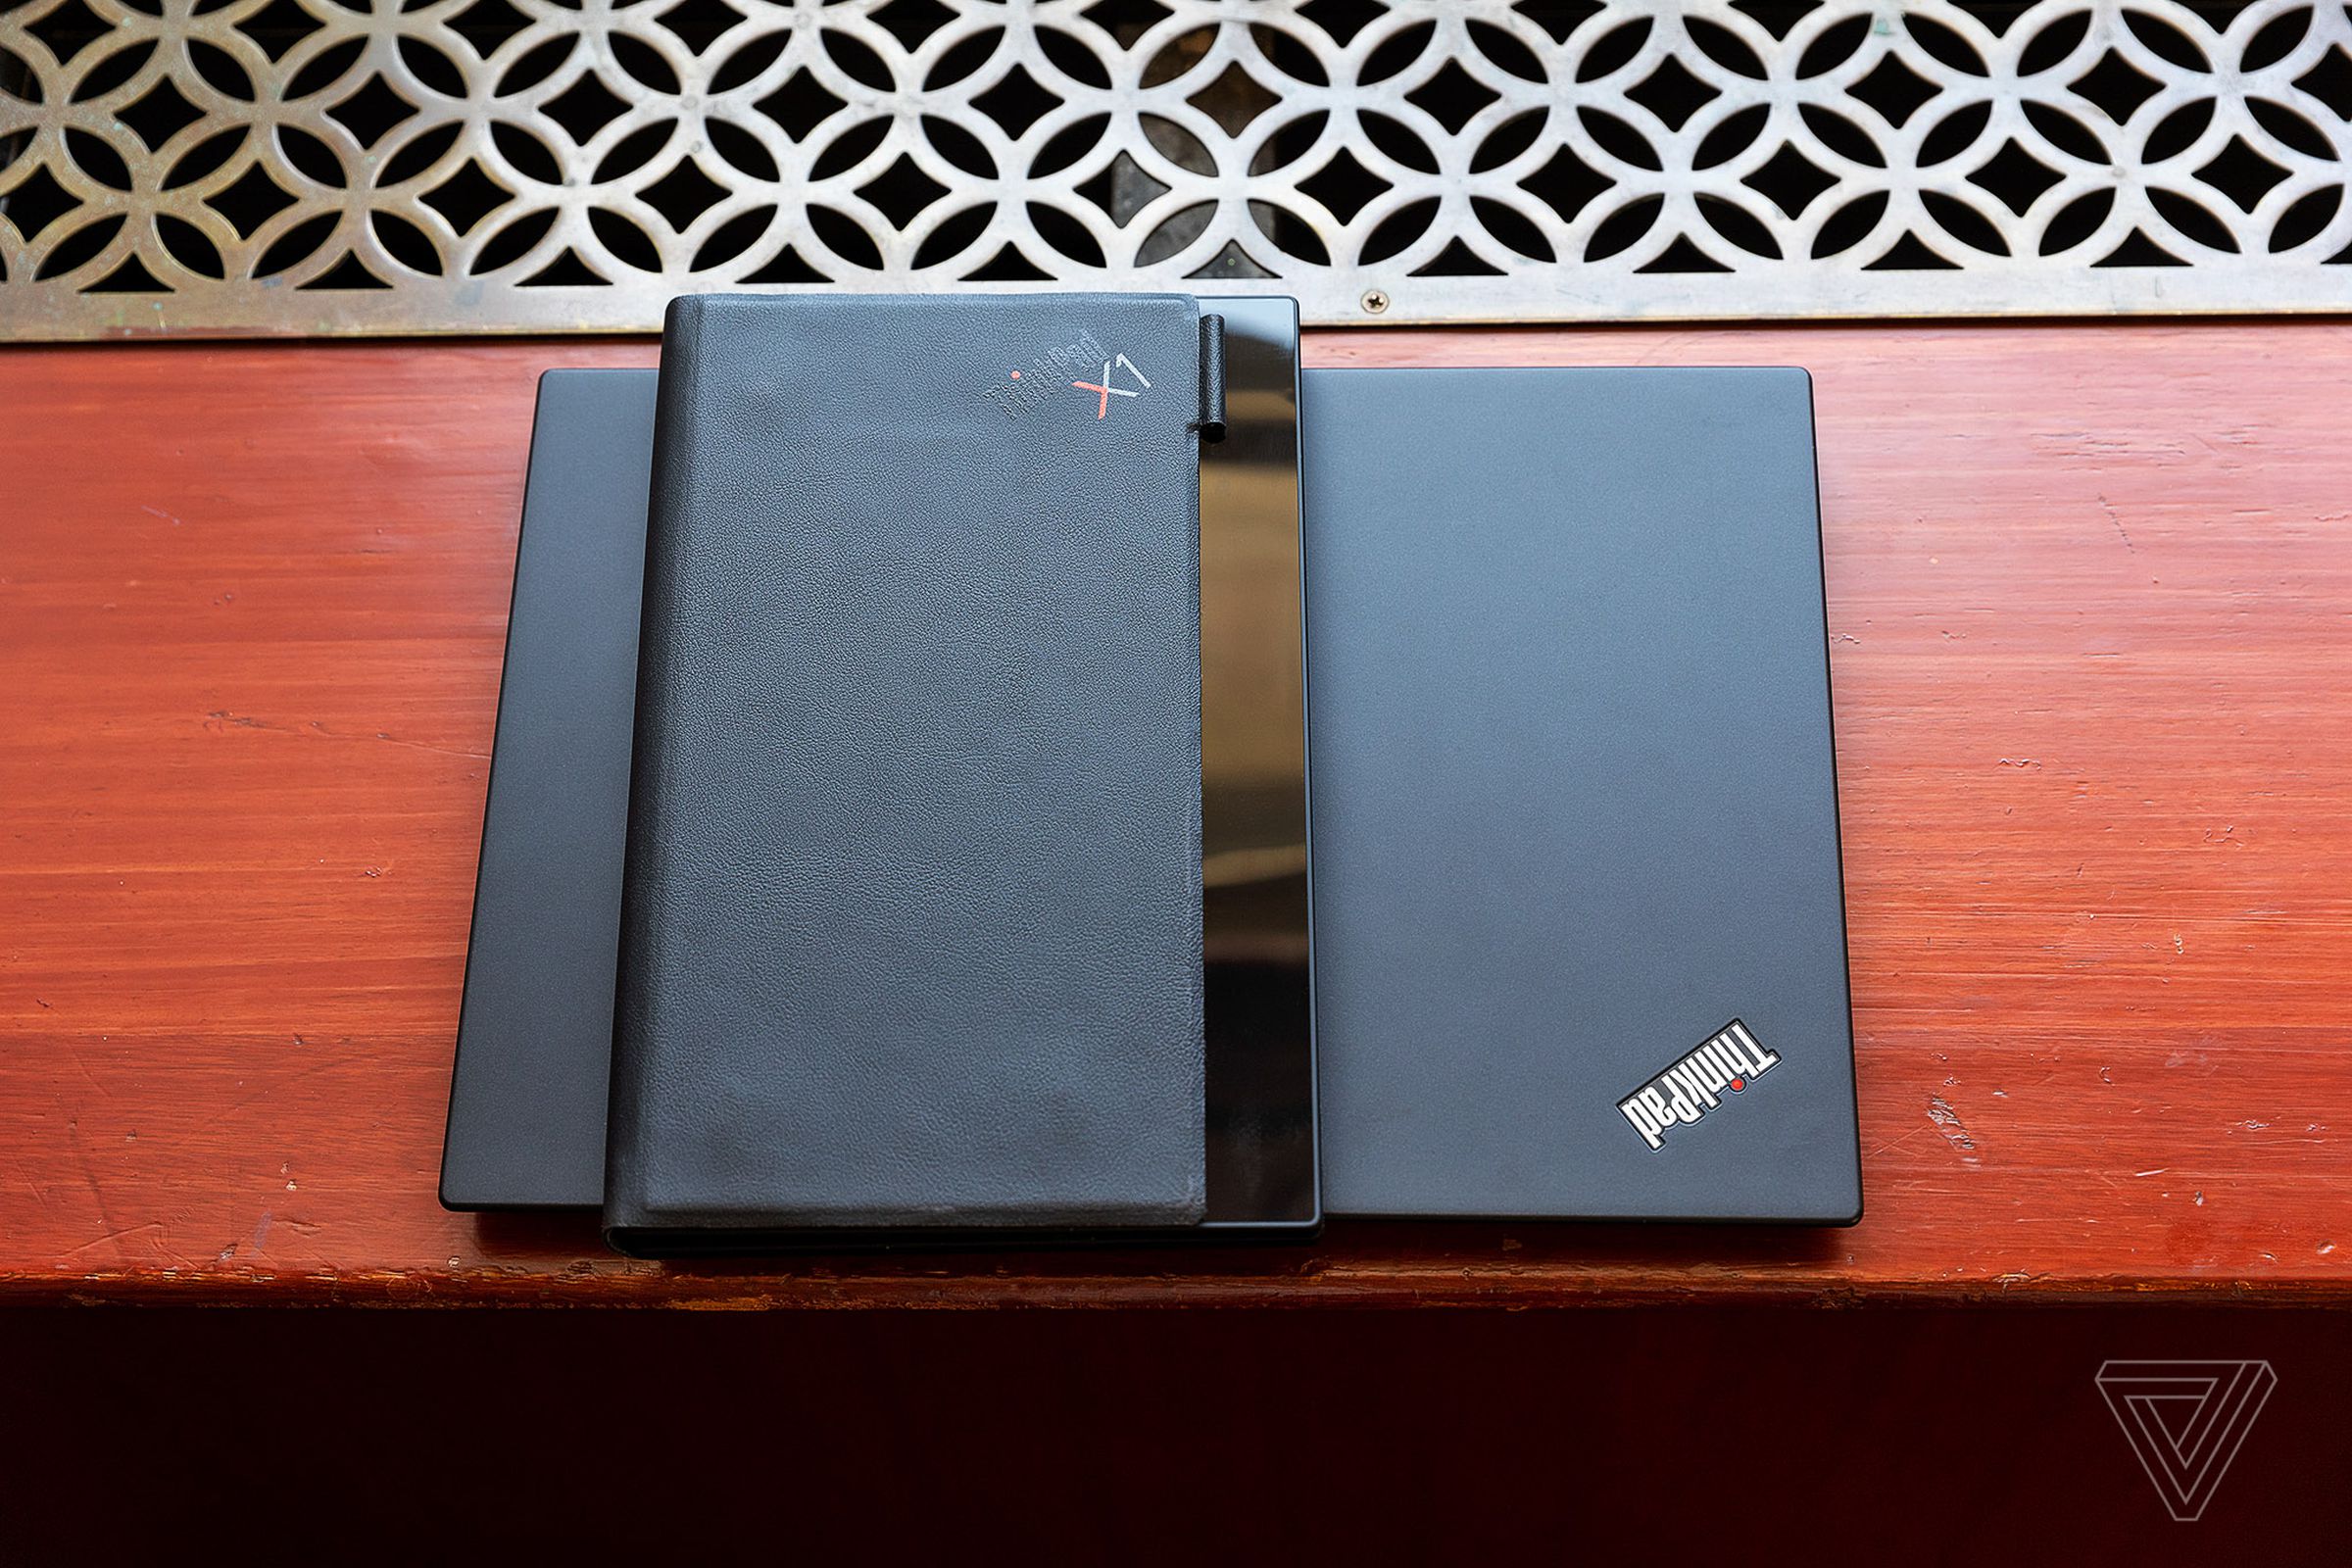 The foldable ThinkPad, compared to a regular 13-inch laptop